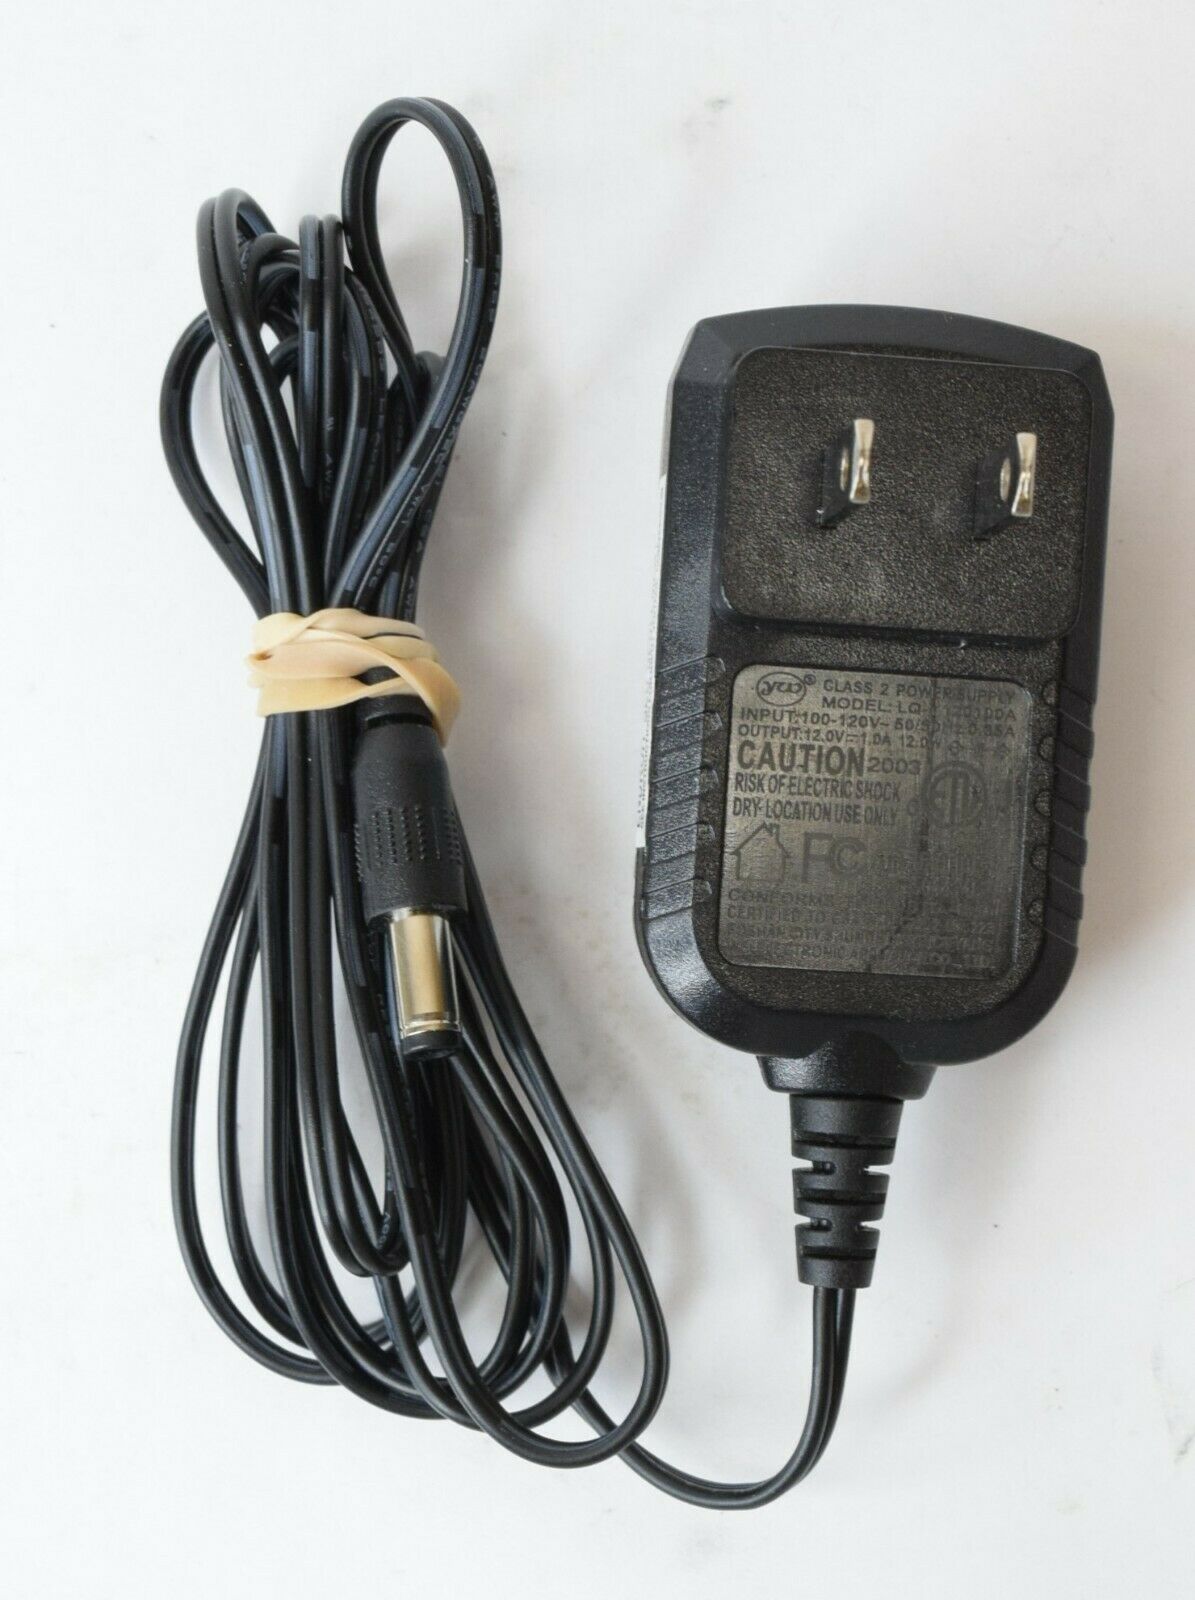 YW Class 2 Power Supply Adapter Unit LQ-L120100A 12V 1A 12W Type: Adapter Output Voltage: 12 V Features: Powered Brand